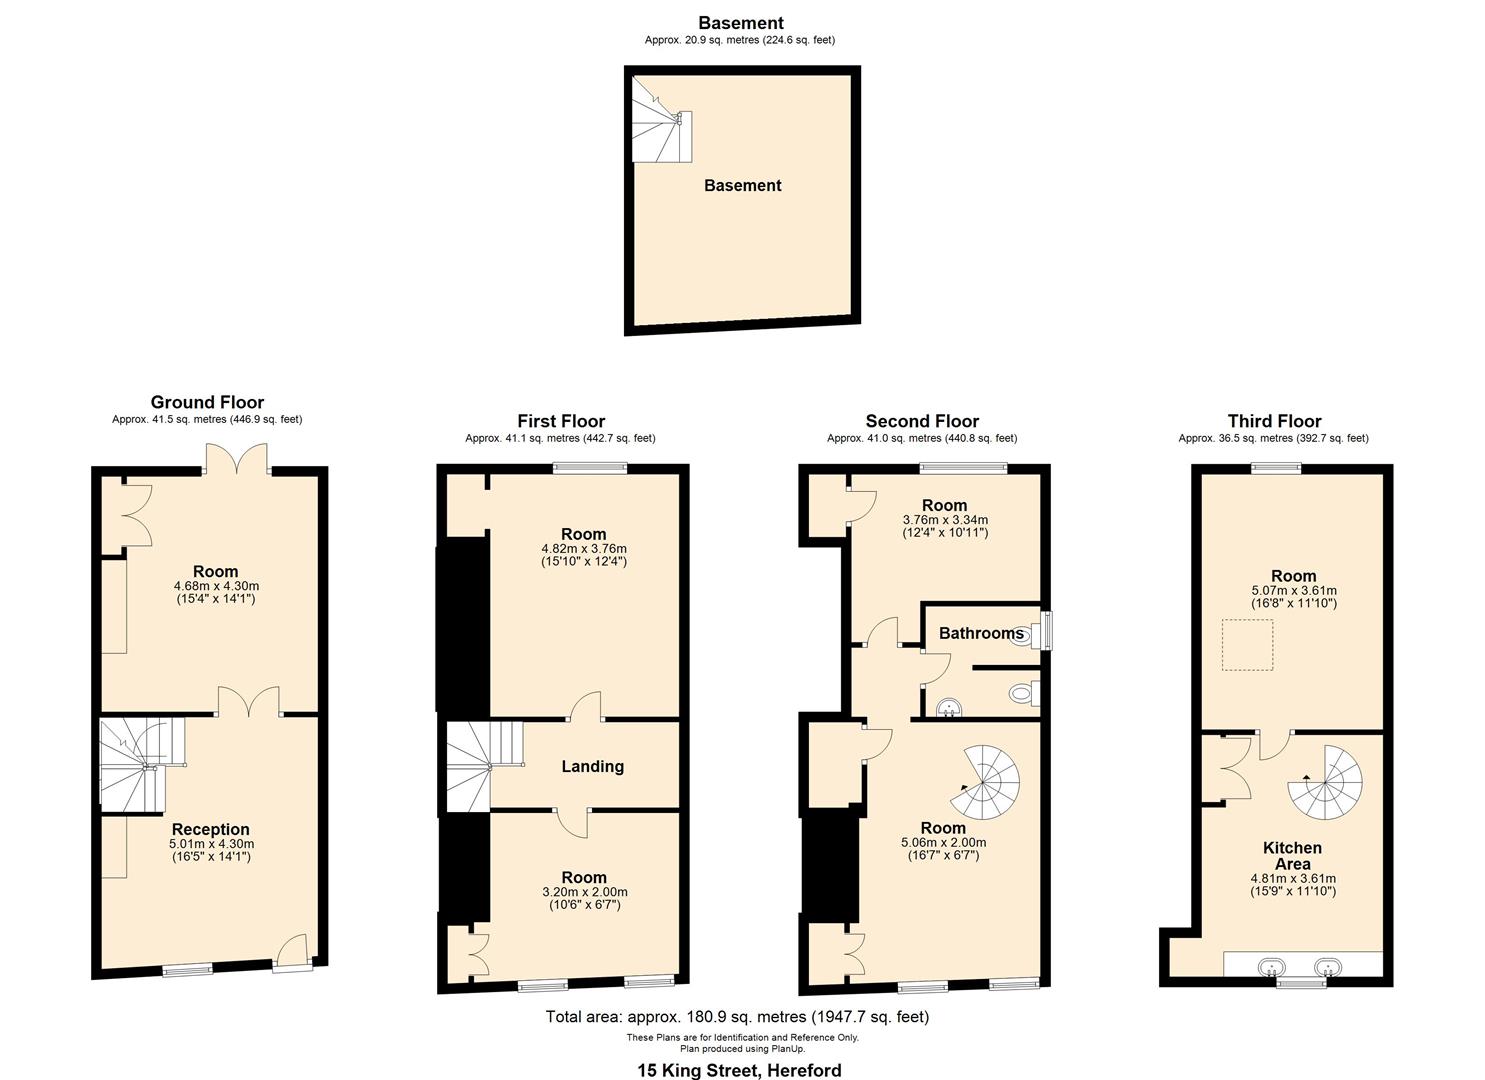 4 bed town house for sale - Property Floorplan